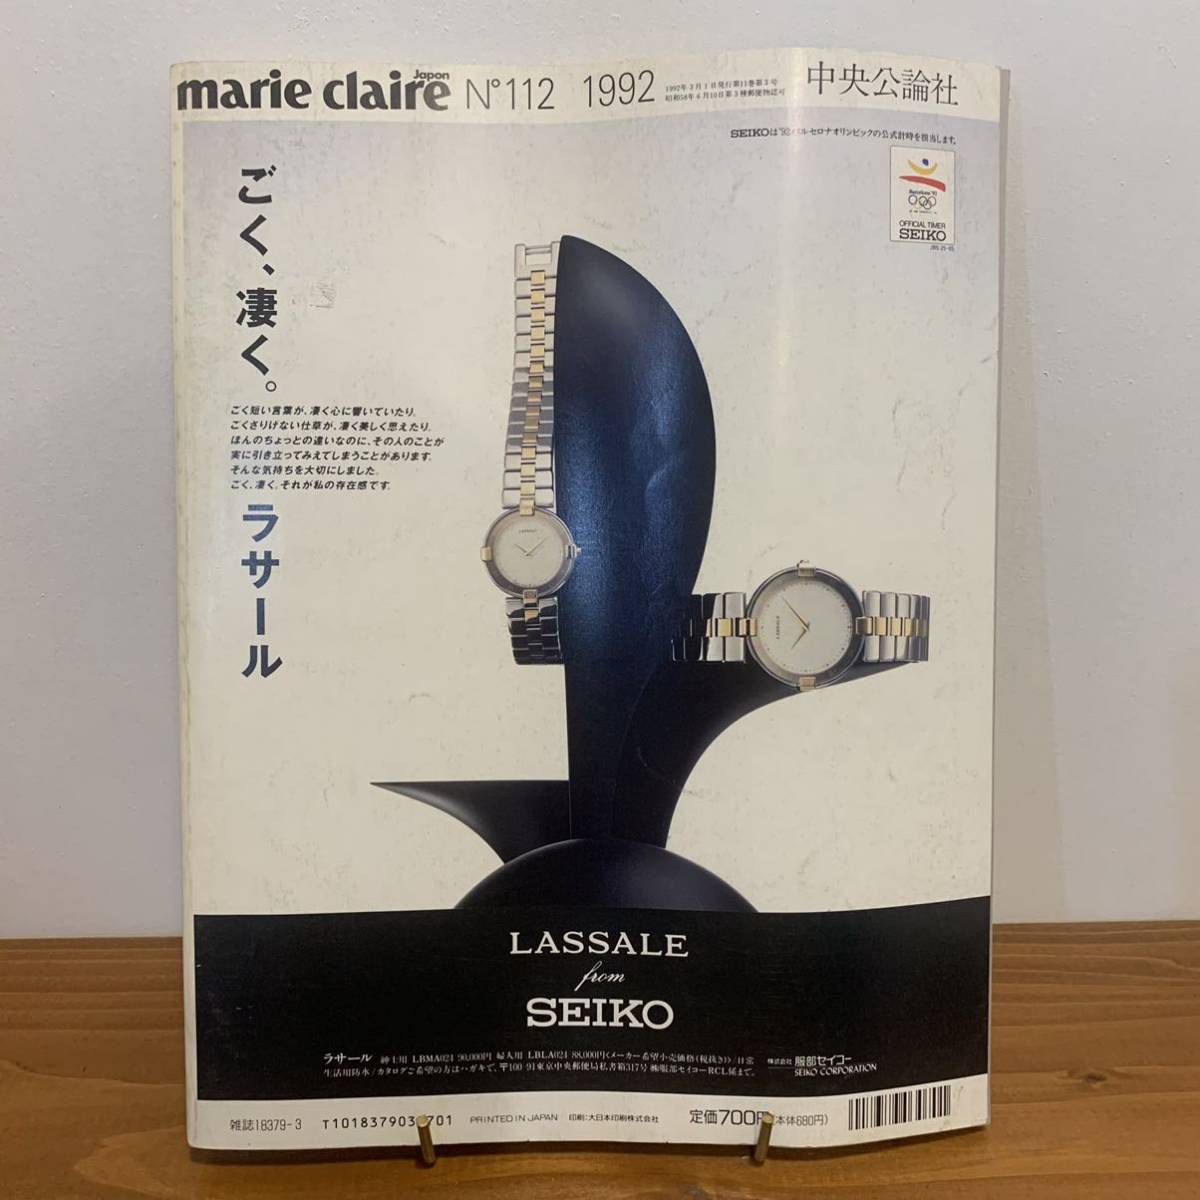 220901 Mali * clair Japan version 1992 year 3 month number *marie claire japon* movie large special collection various love. ...* retro fashion mode magazine 